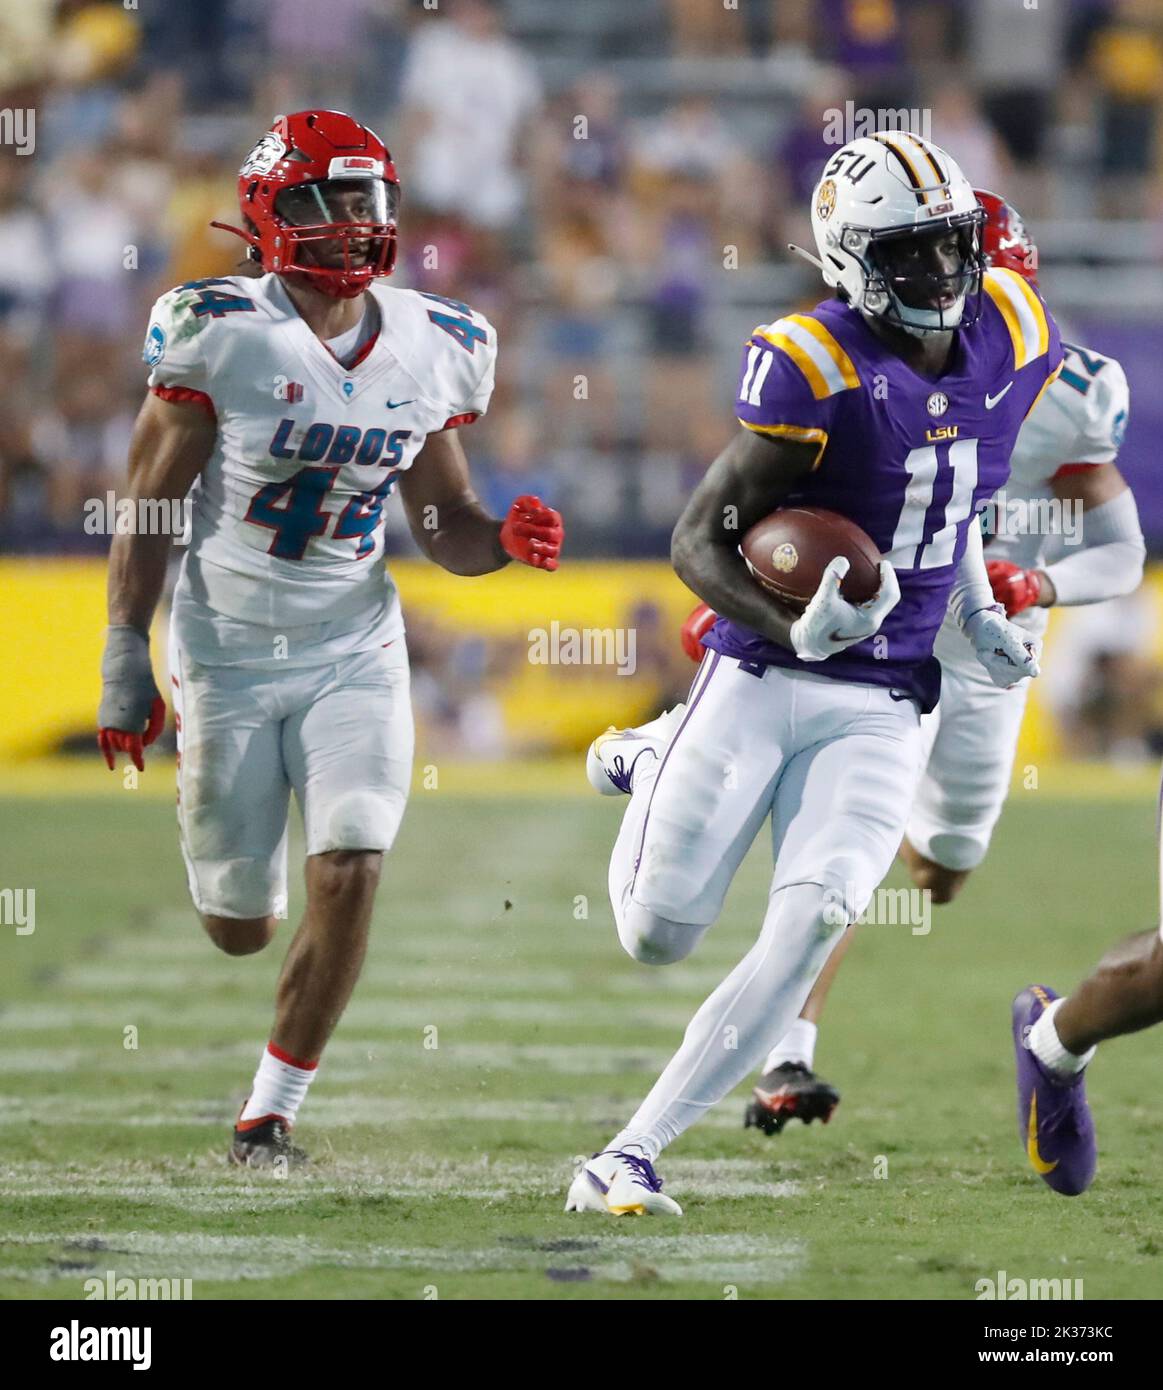 LSU Tigers wide receiver Brian Thomas Jr. (11) runs past New Mexico Lobos linebacker Reco Hannah (44) en route to a 57-yard touchdown catch at the 13:14 mark in the fourth quarter of a college football game at Tiger Stadium in Baton Rouge, Louisiana on Saturday, September 24, 2022.  (Photo by Peter G. Forest/Sipa USA) Stock Photo